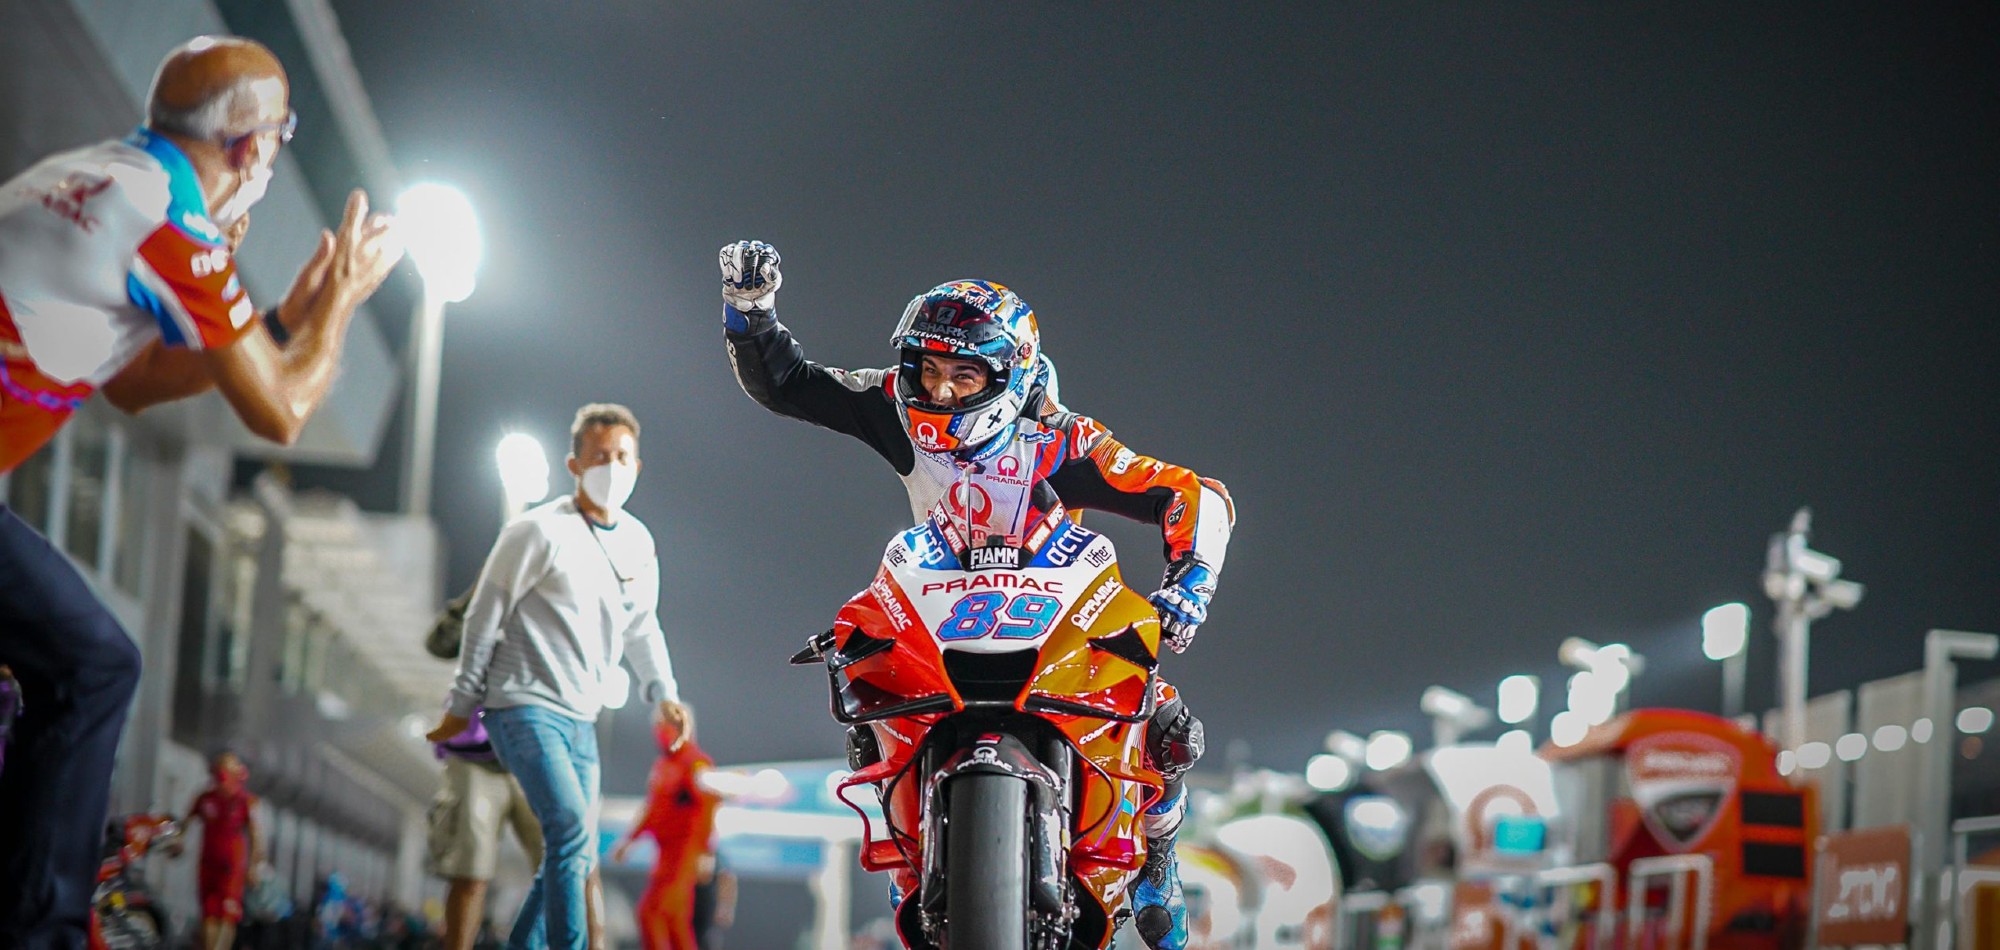 8.928 seconds: MotoGP’s closest ever top 15 recorded at Losail